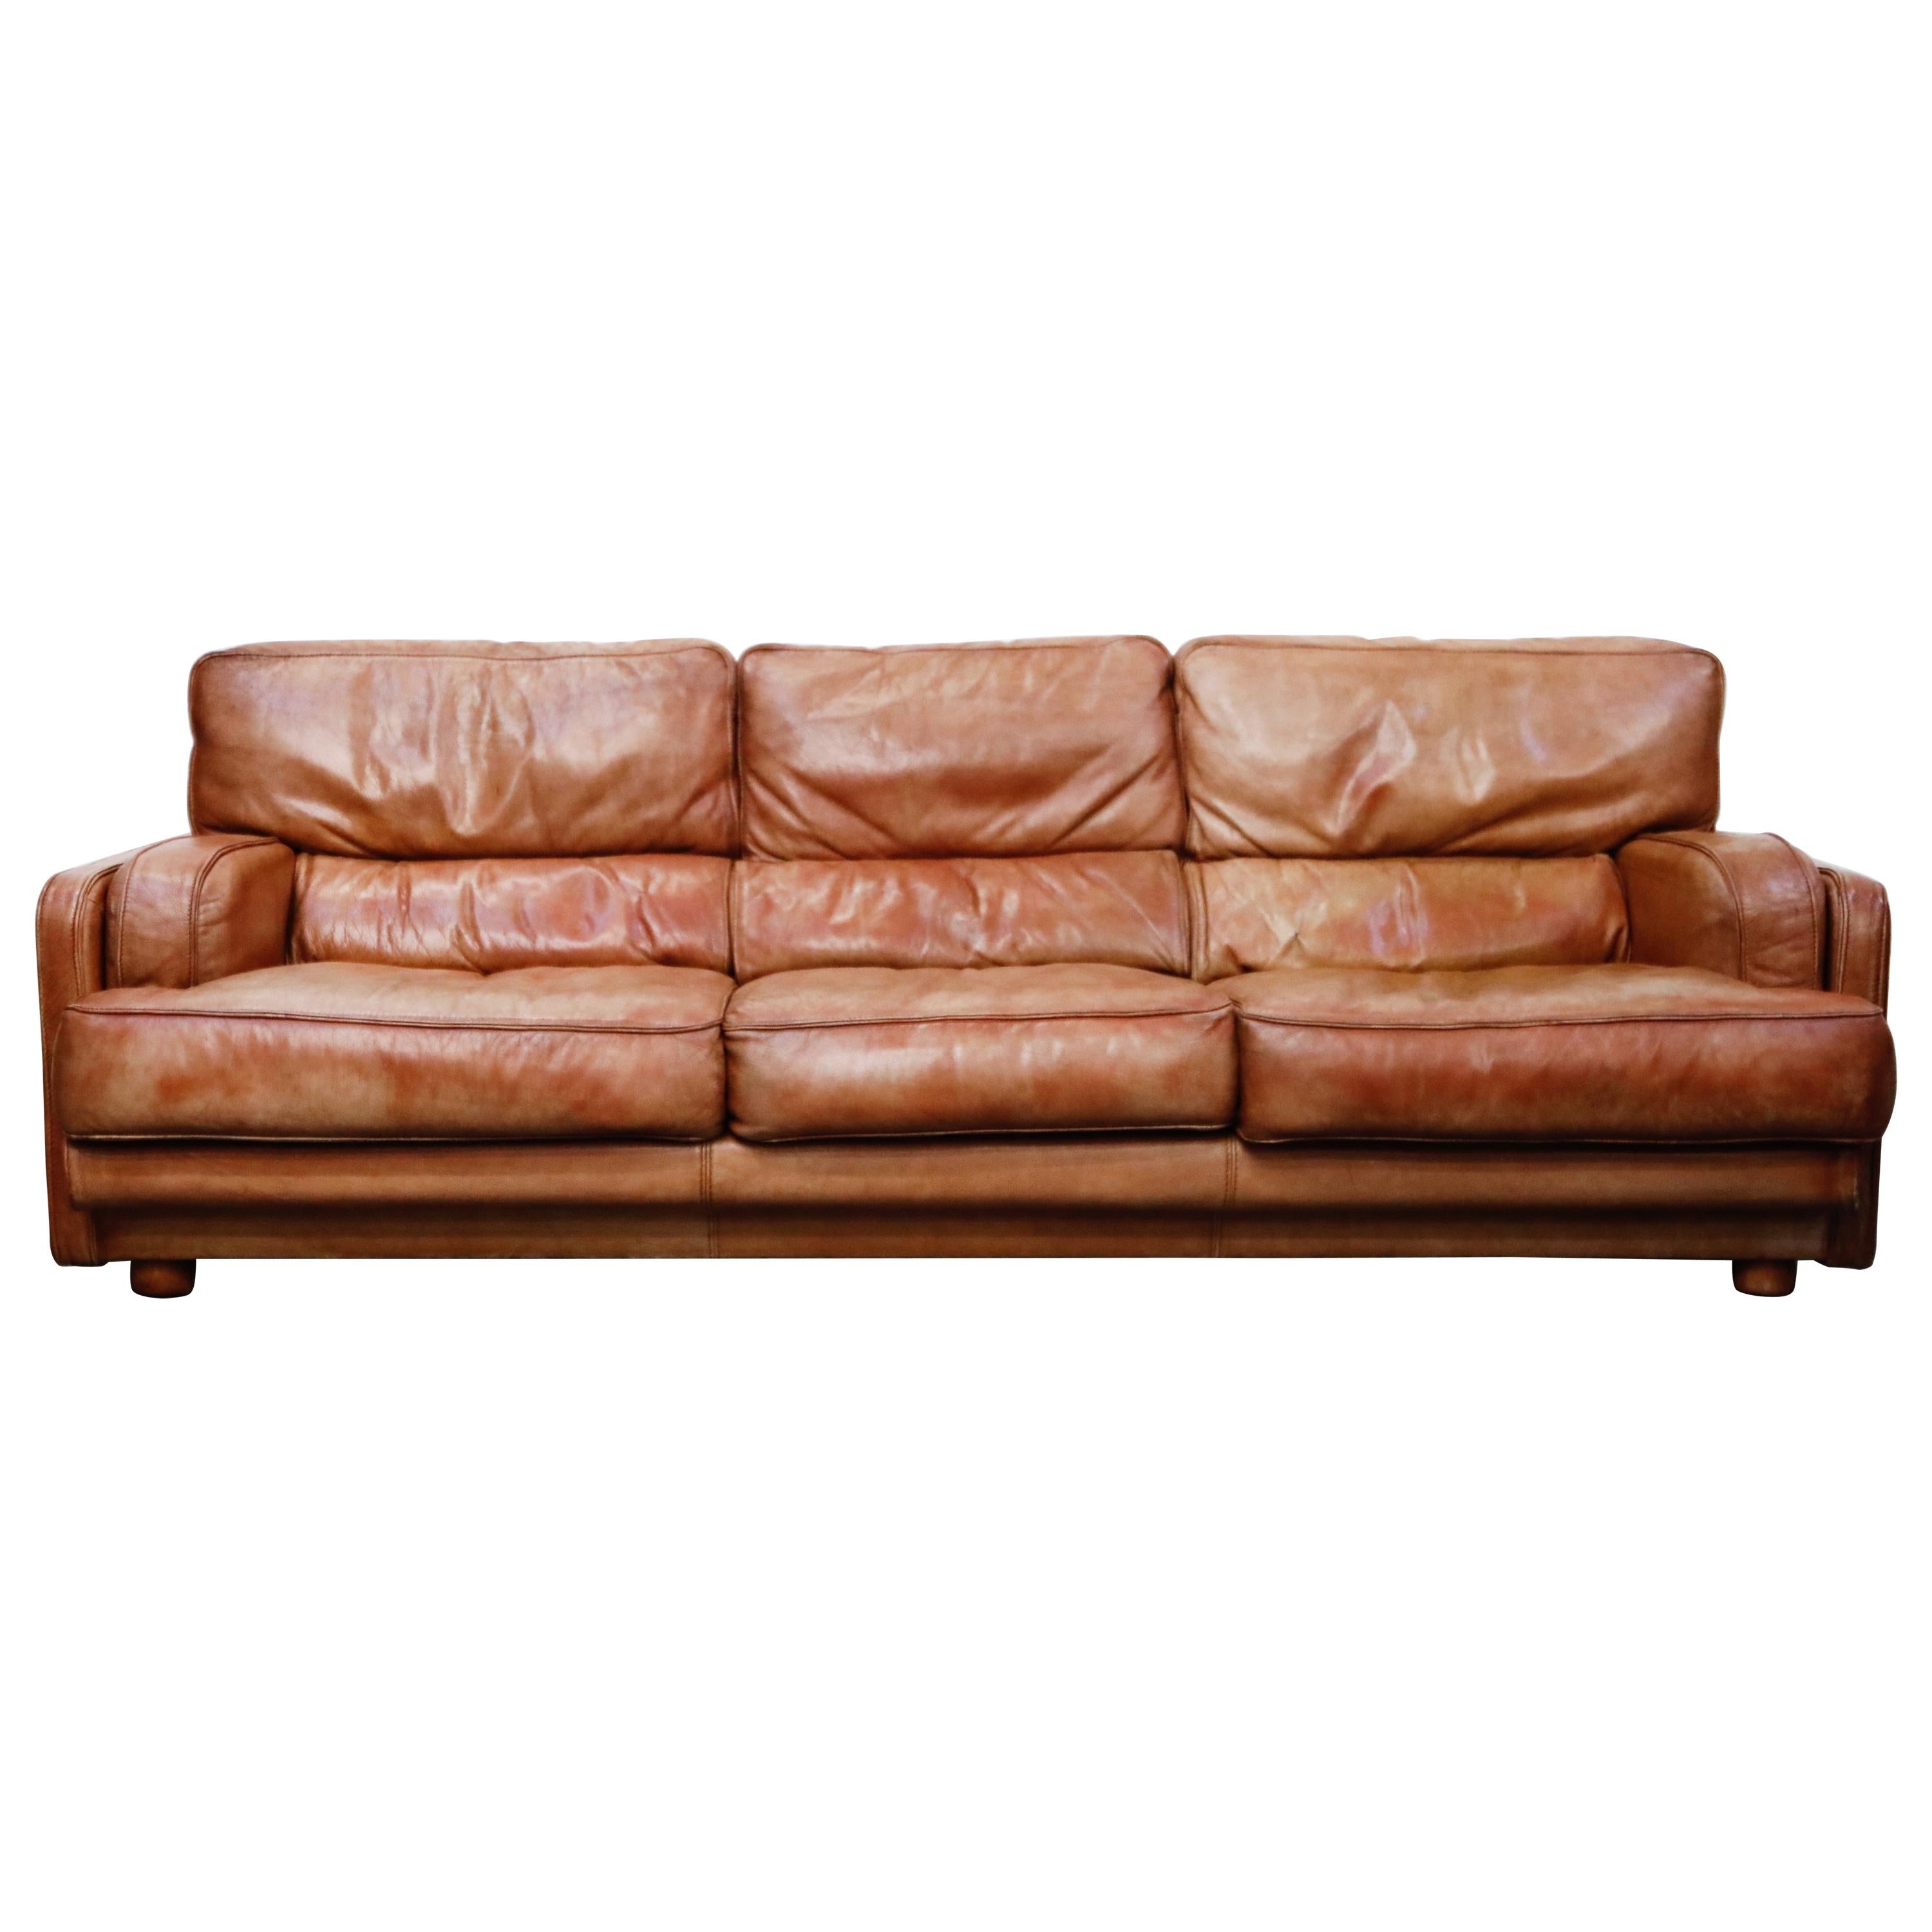 Italian Deep Seated Waterfowl Feather and Leather Sofa by Natuzzi, circa 1970s